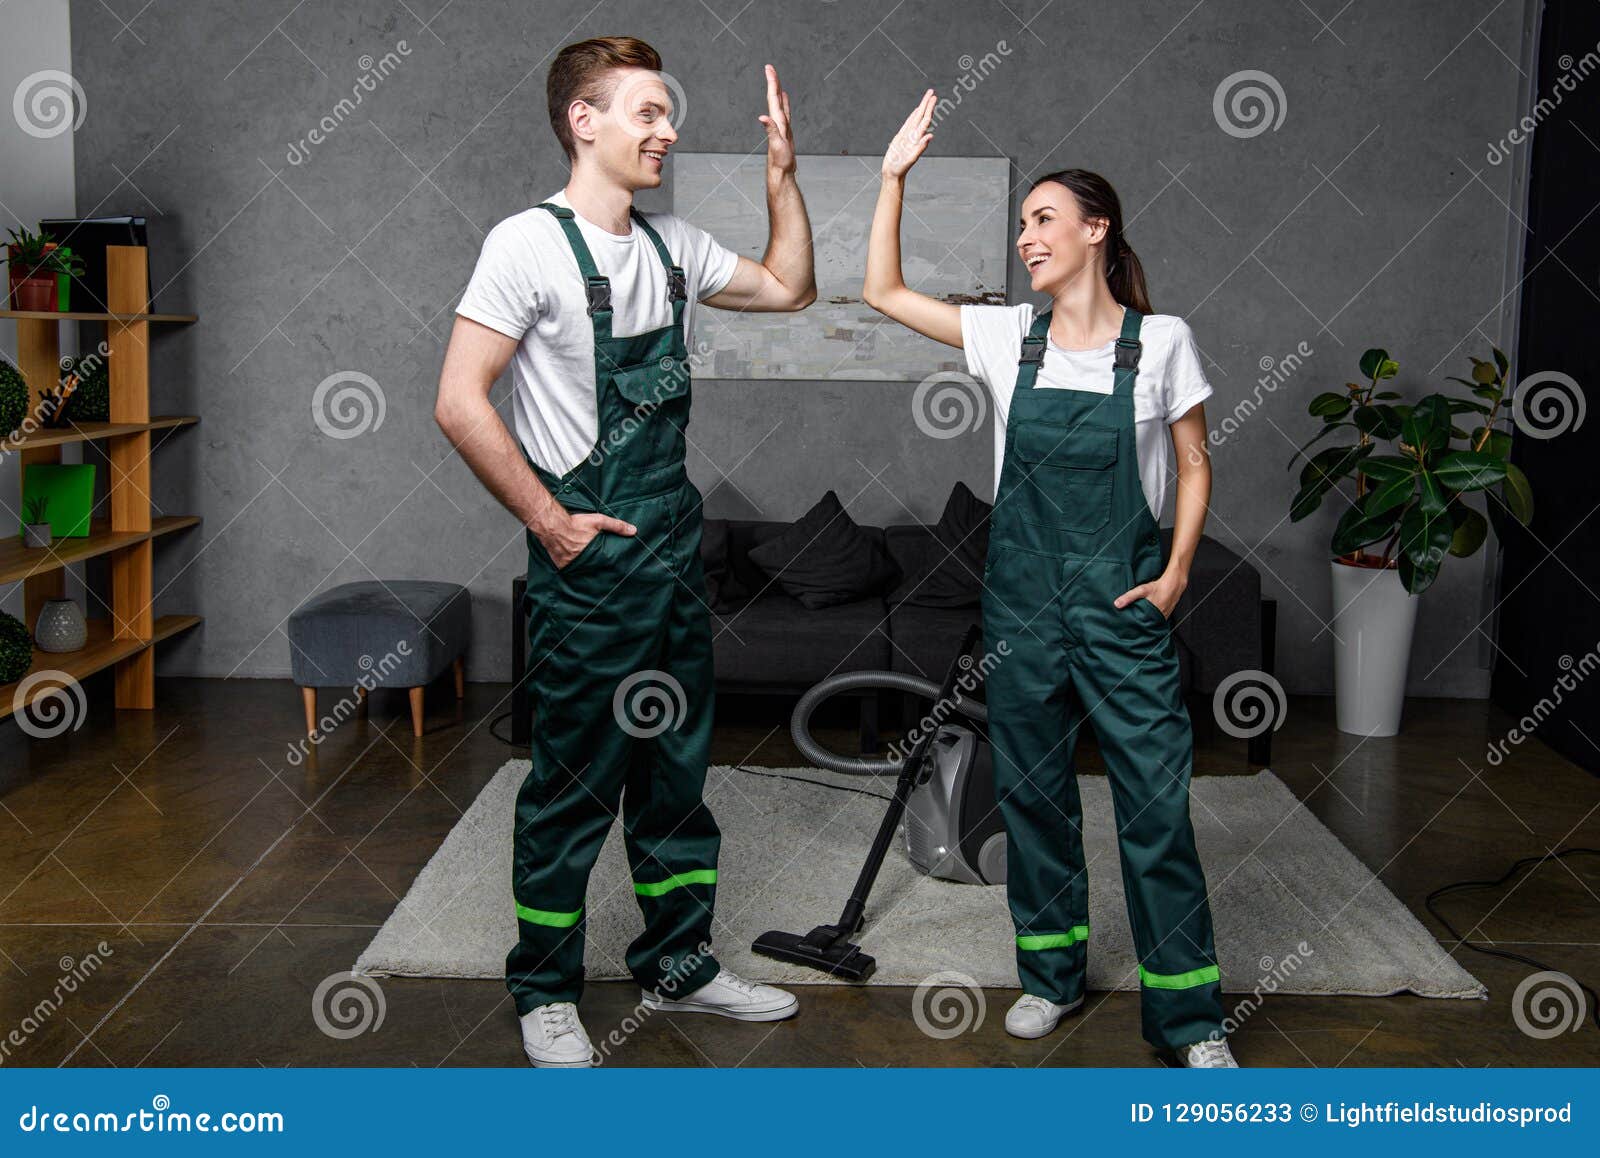 happy young professional cleaners smiling each other and giving high